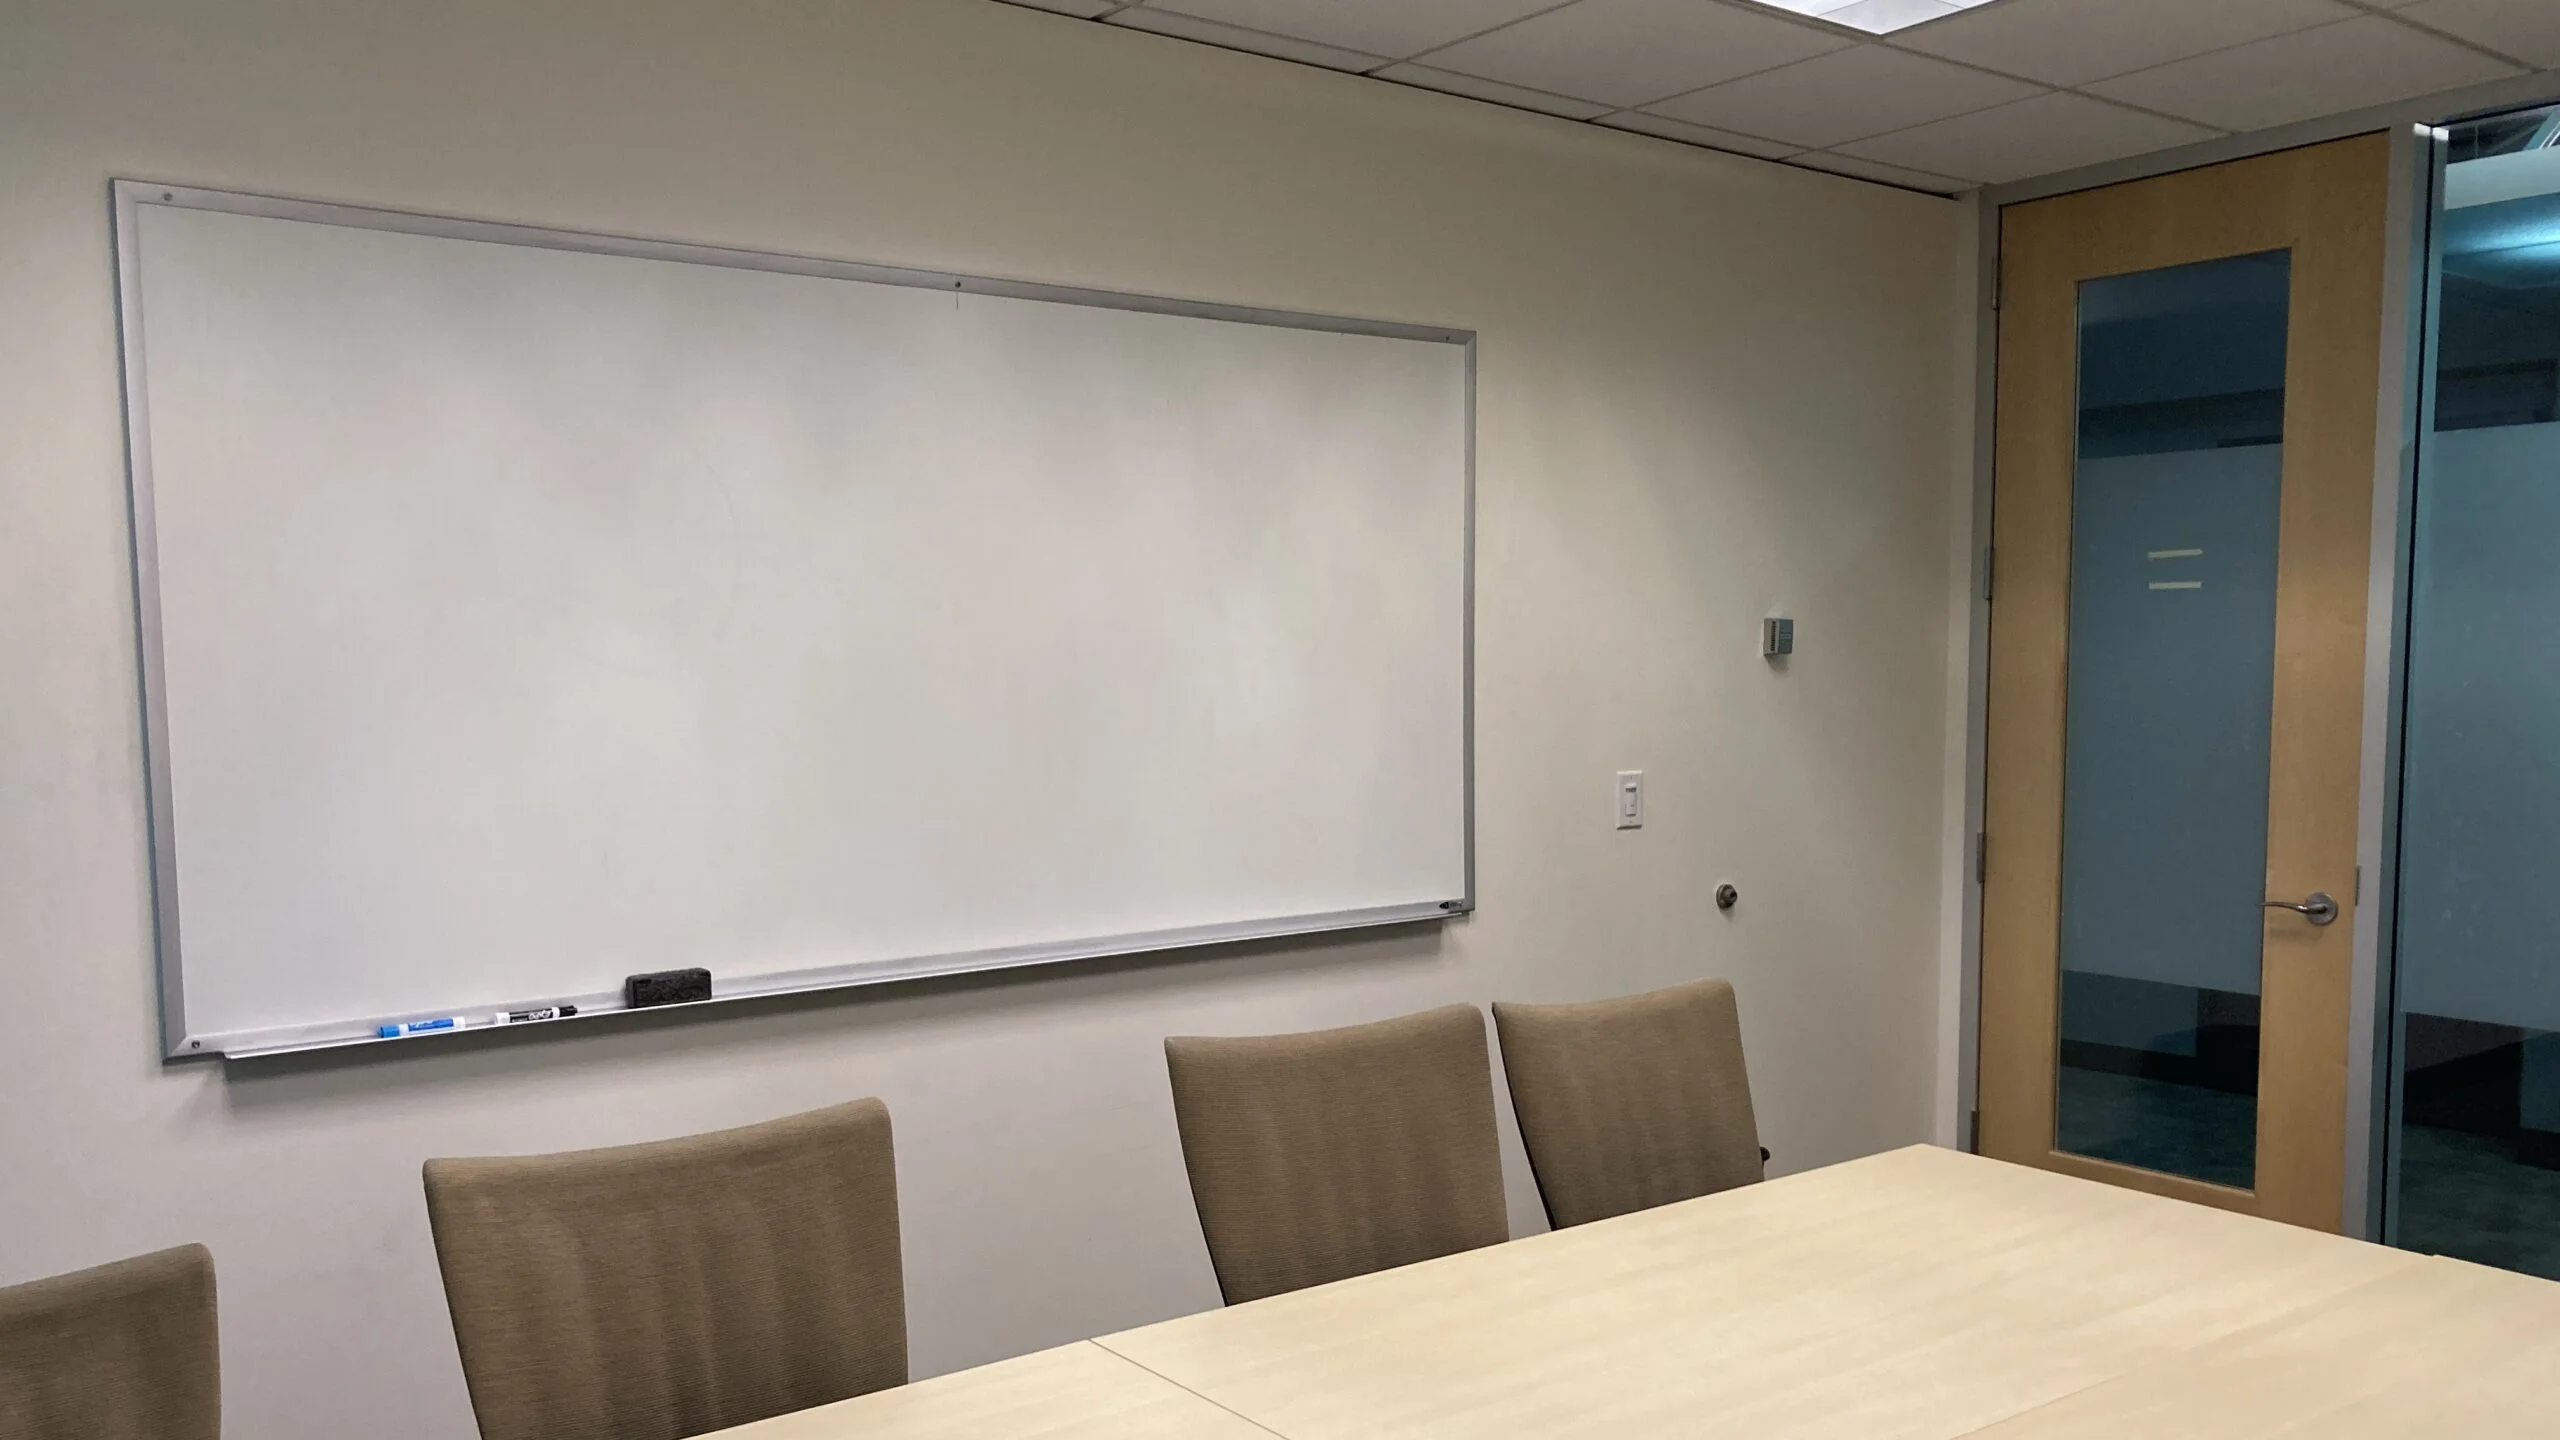 Lanai customizable meeting room for rent at SURF Incubator in downtown Seattle Washington